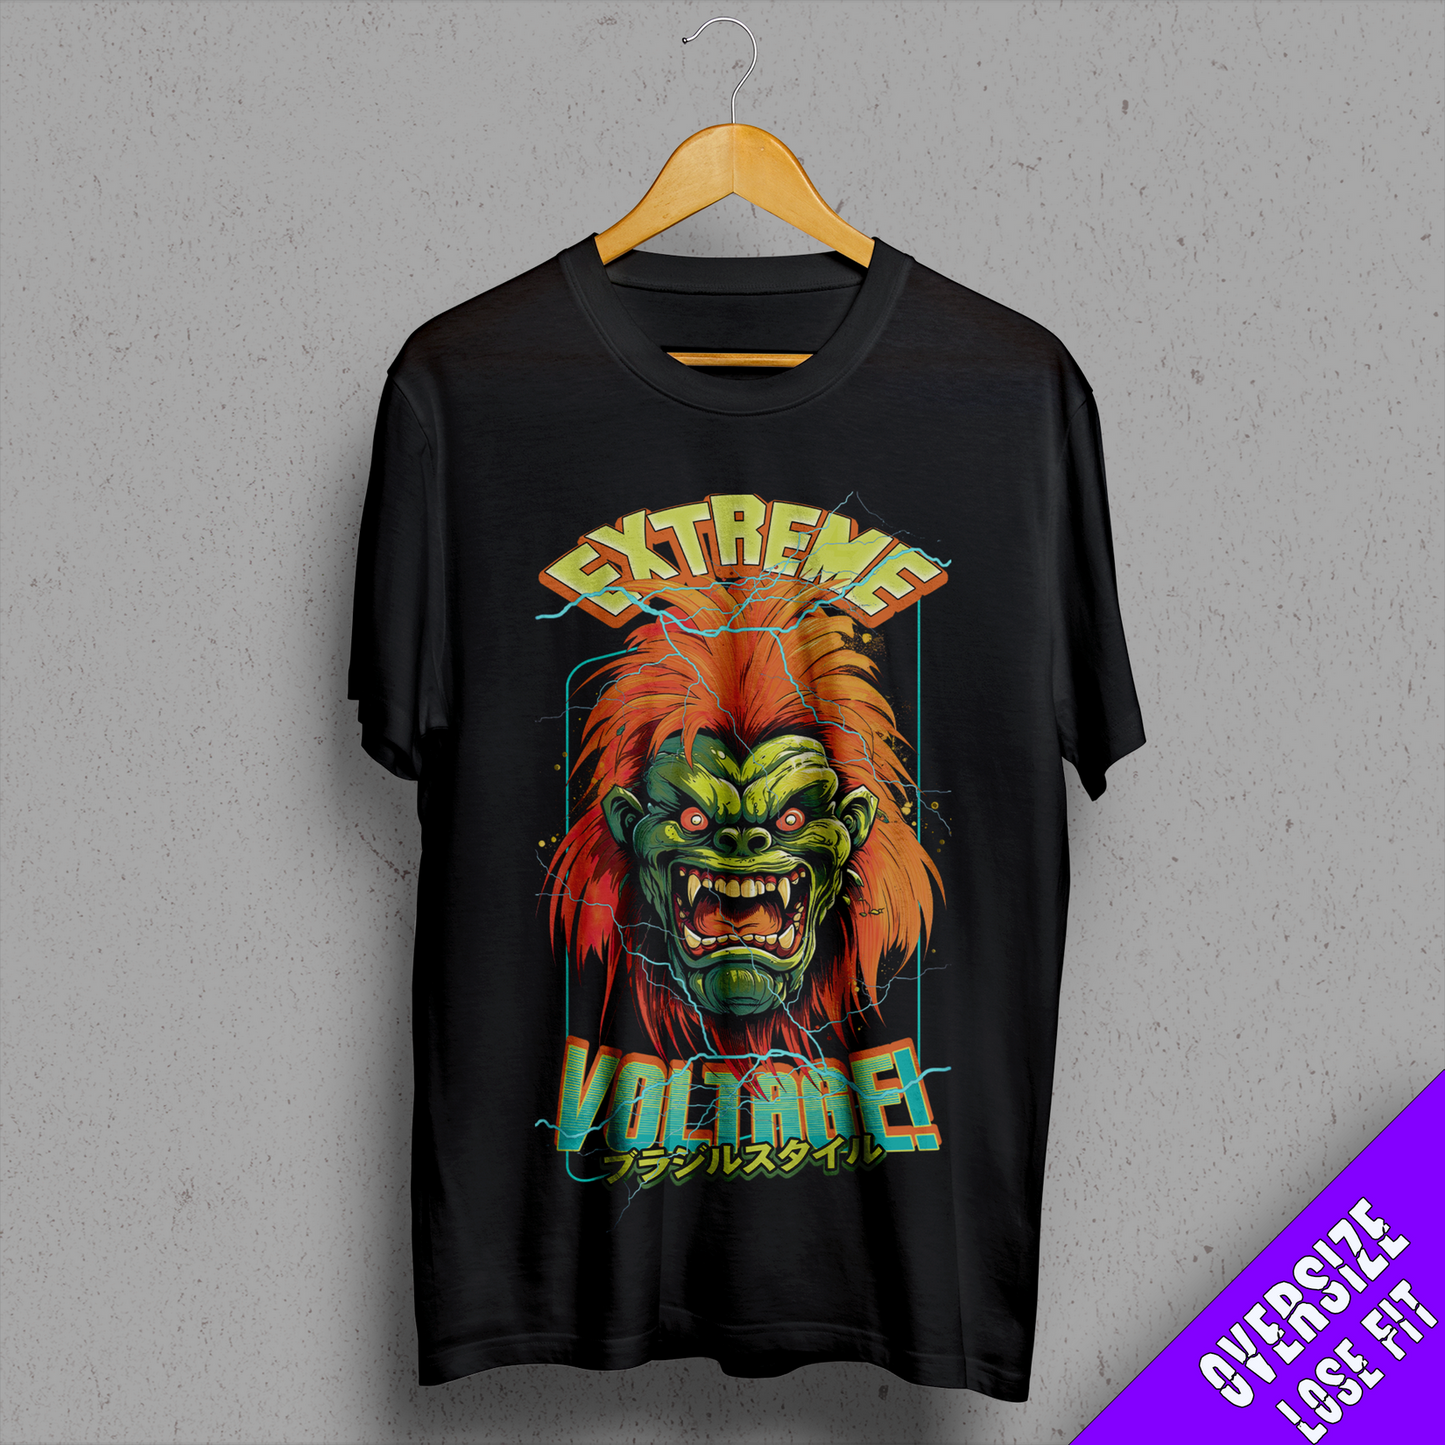 TEE NR 514 | BLANKA EXTREME VOLTAGE | STREET FIGHTER INSPIRED SHORT SLEEVE T-SHIRT FOR M/F